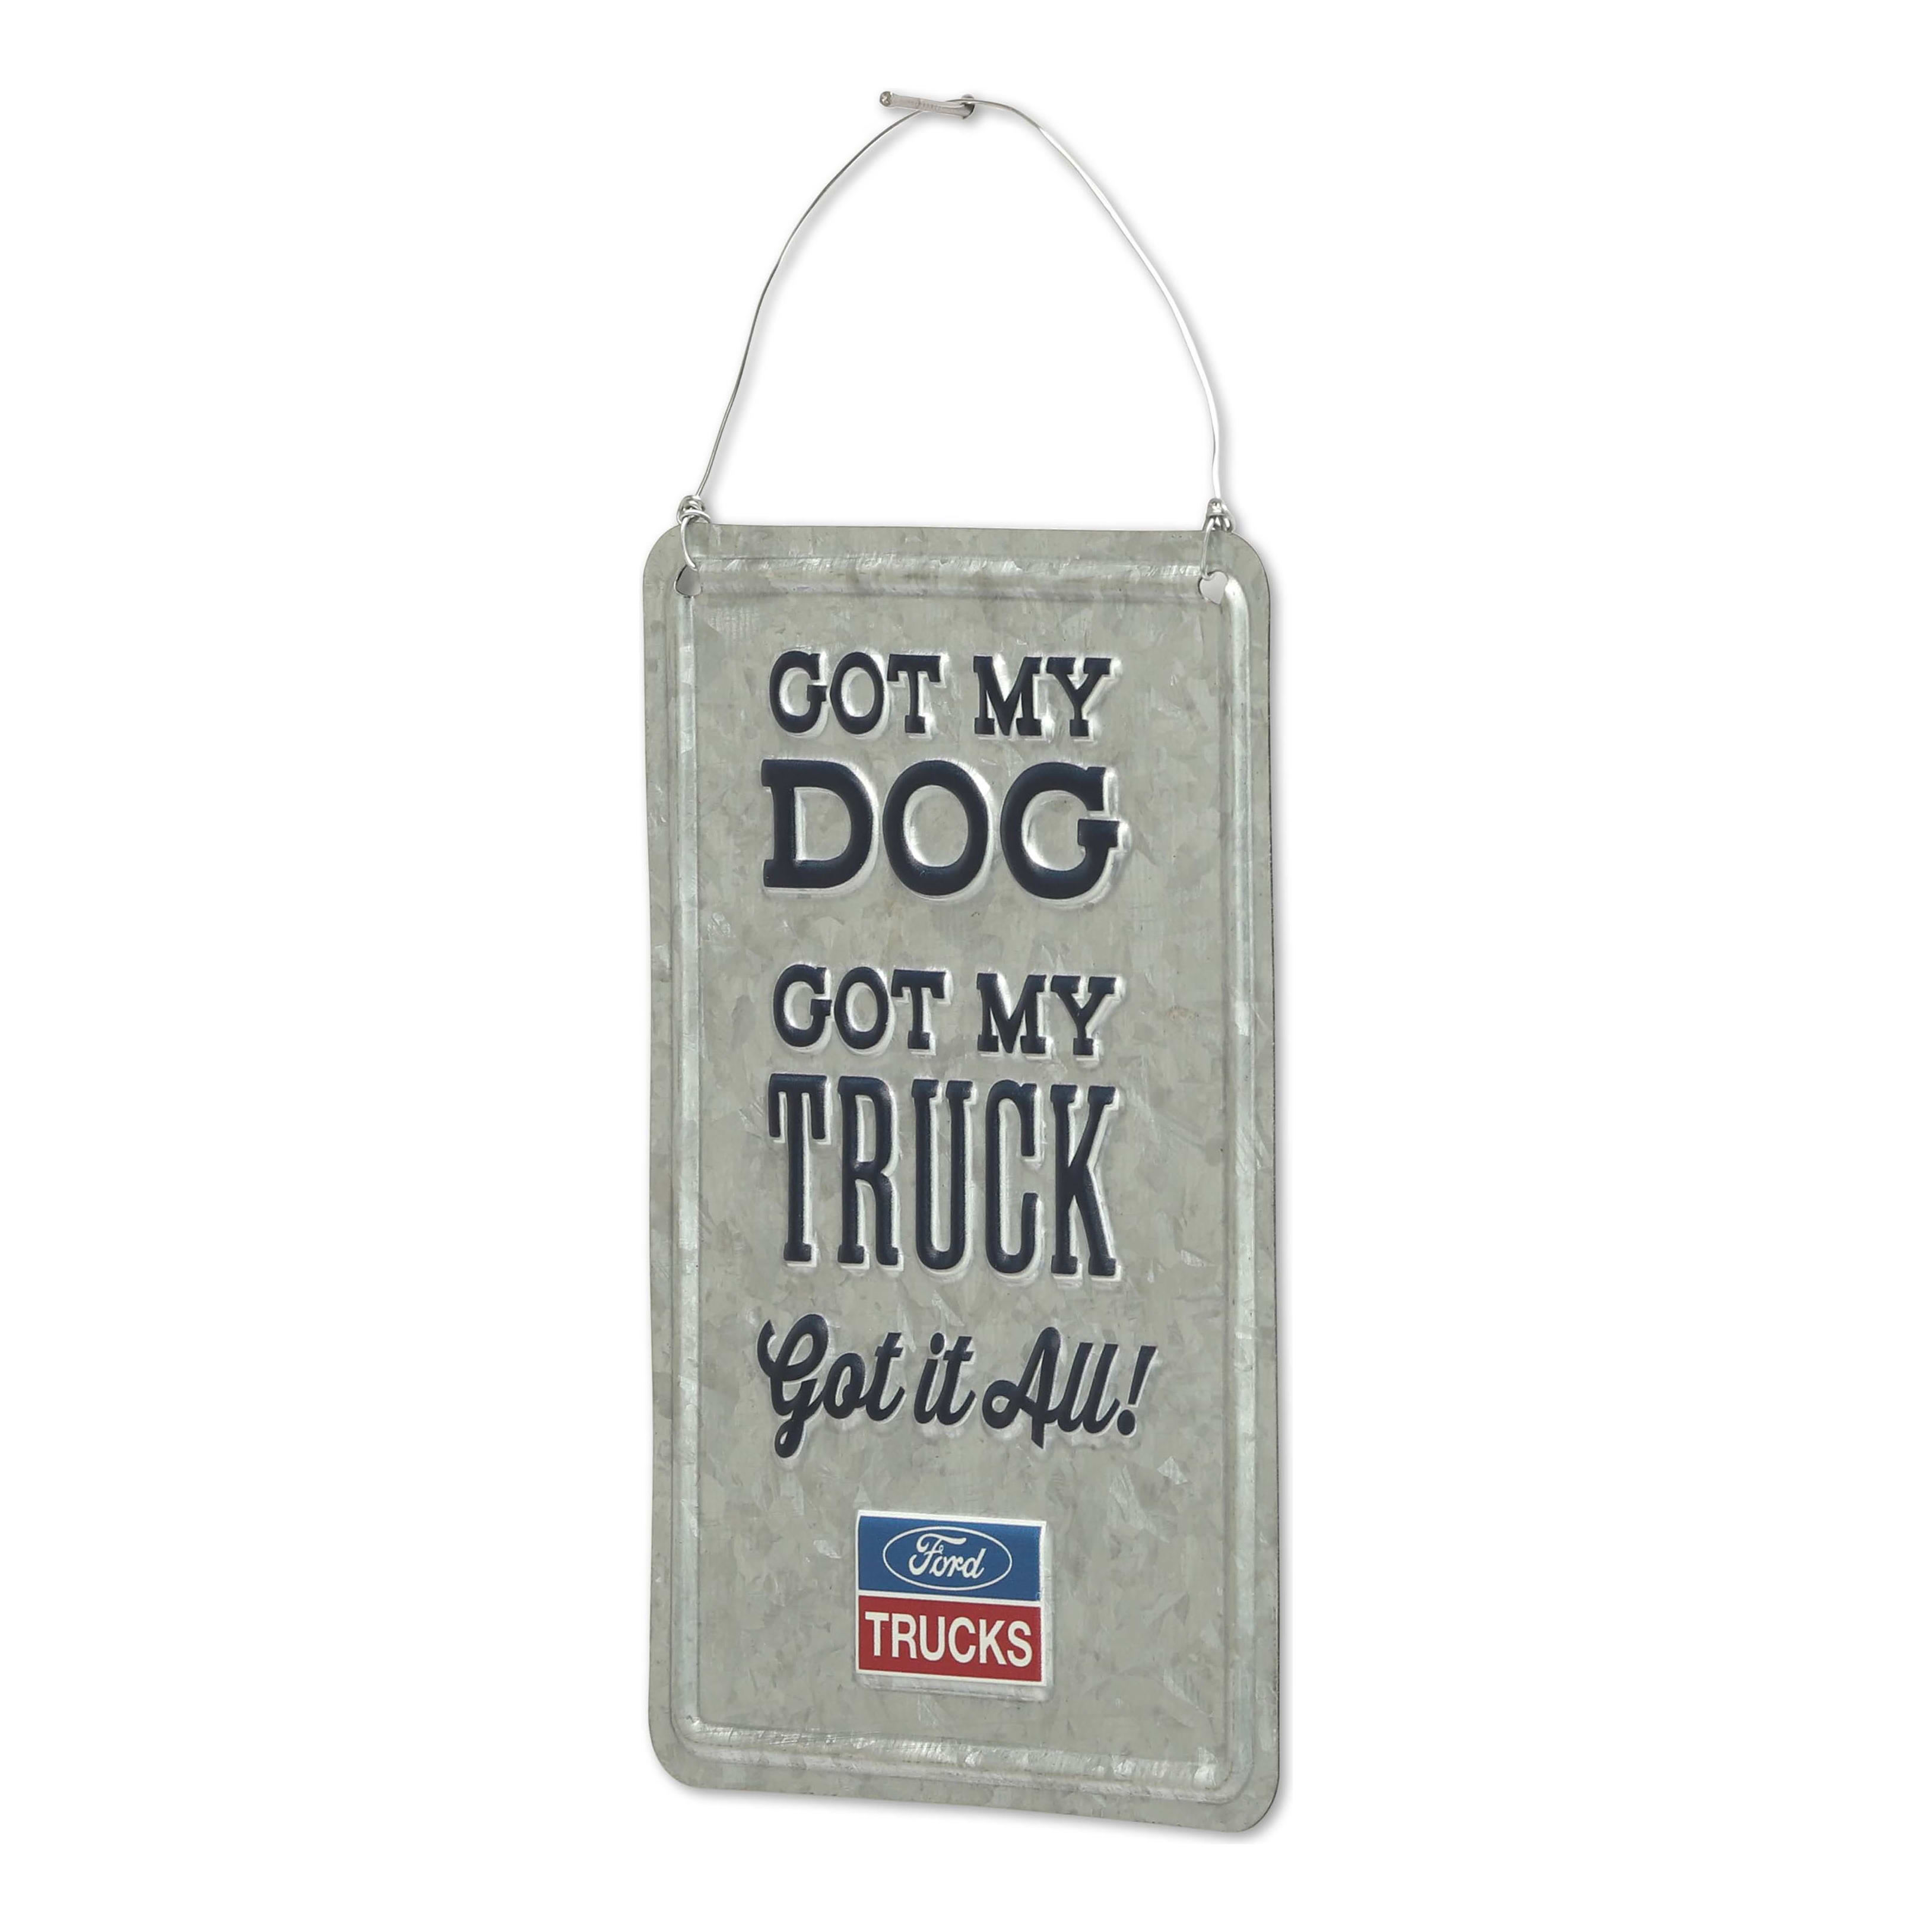 Open Road's Ford Got My Dog & Truck Metal Sign